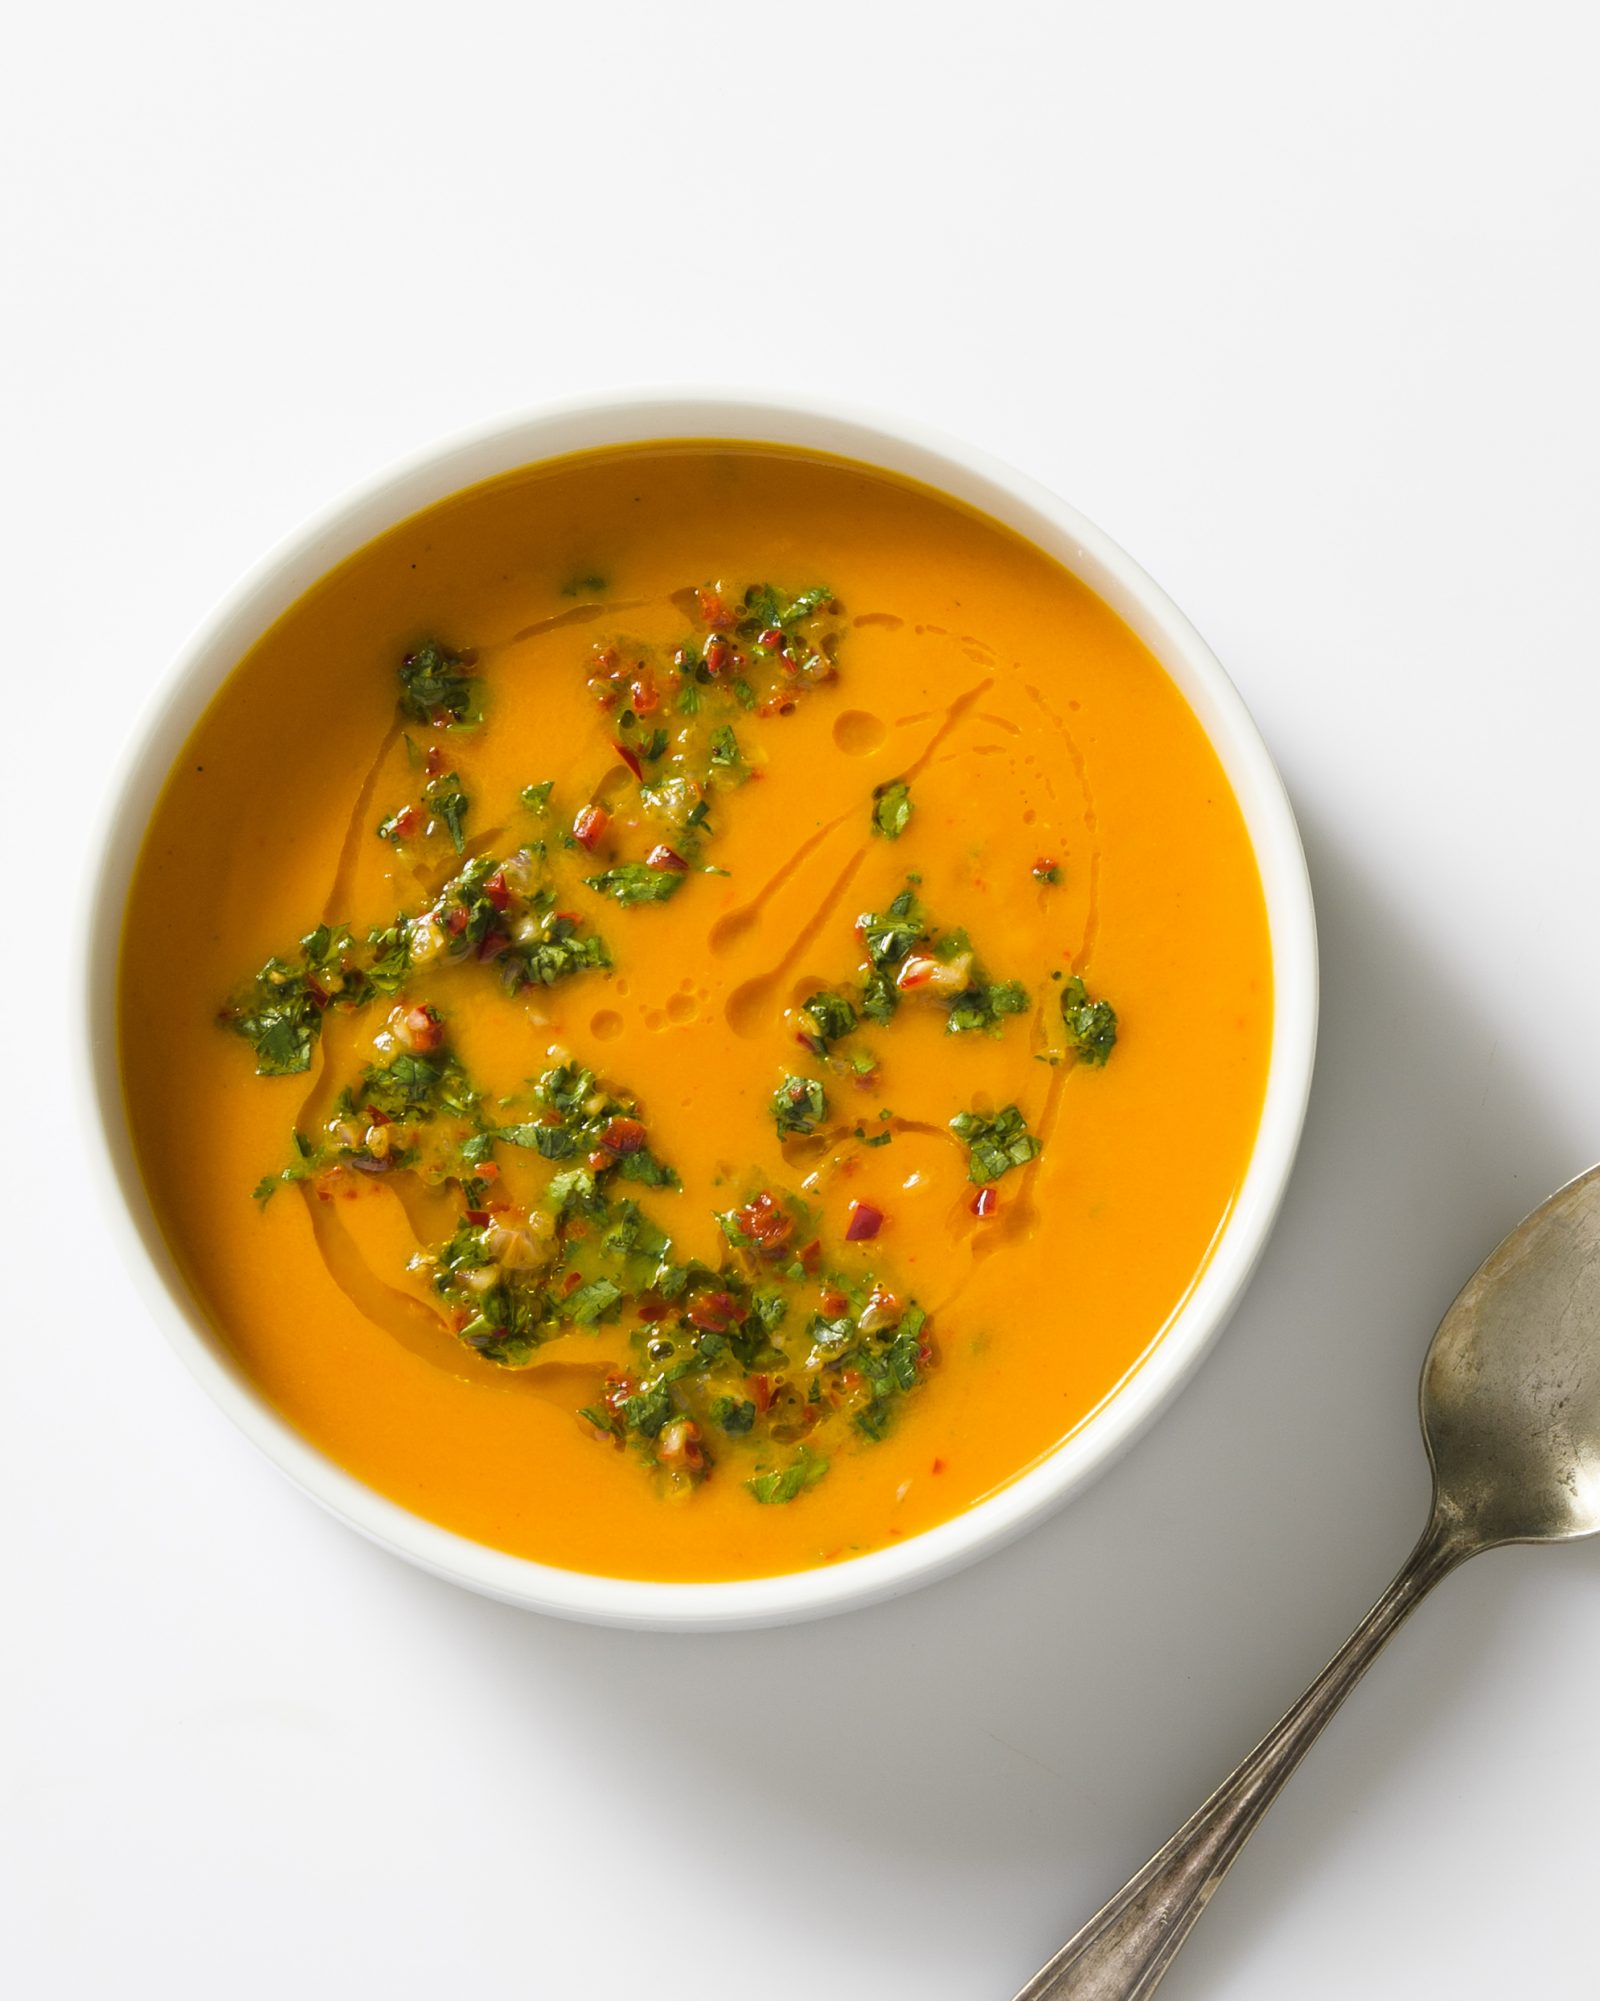 Christopher Kimball's Milk Street – Recipes – Carrot lime soup with cilantro v